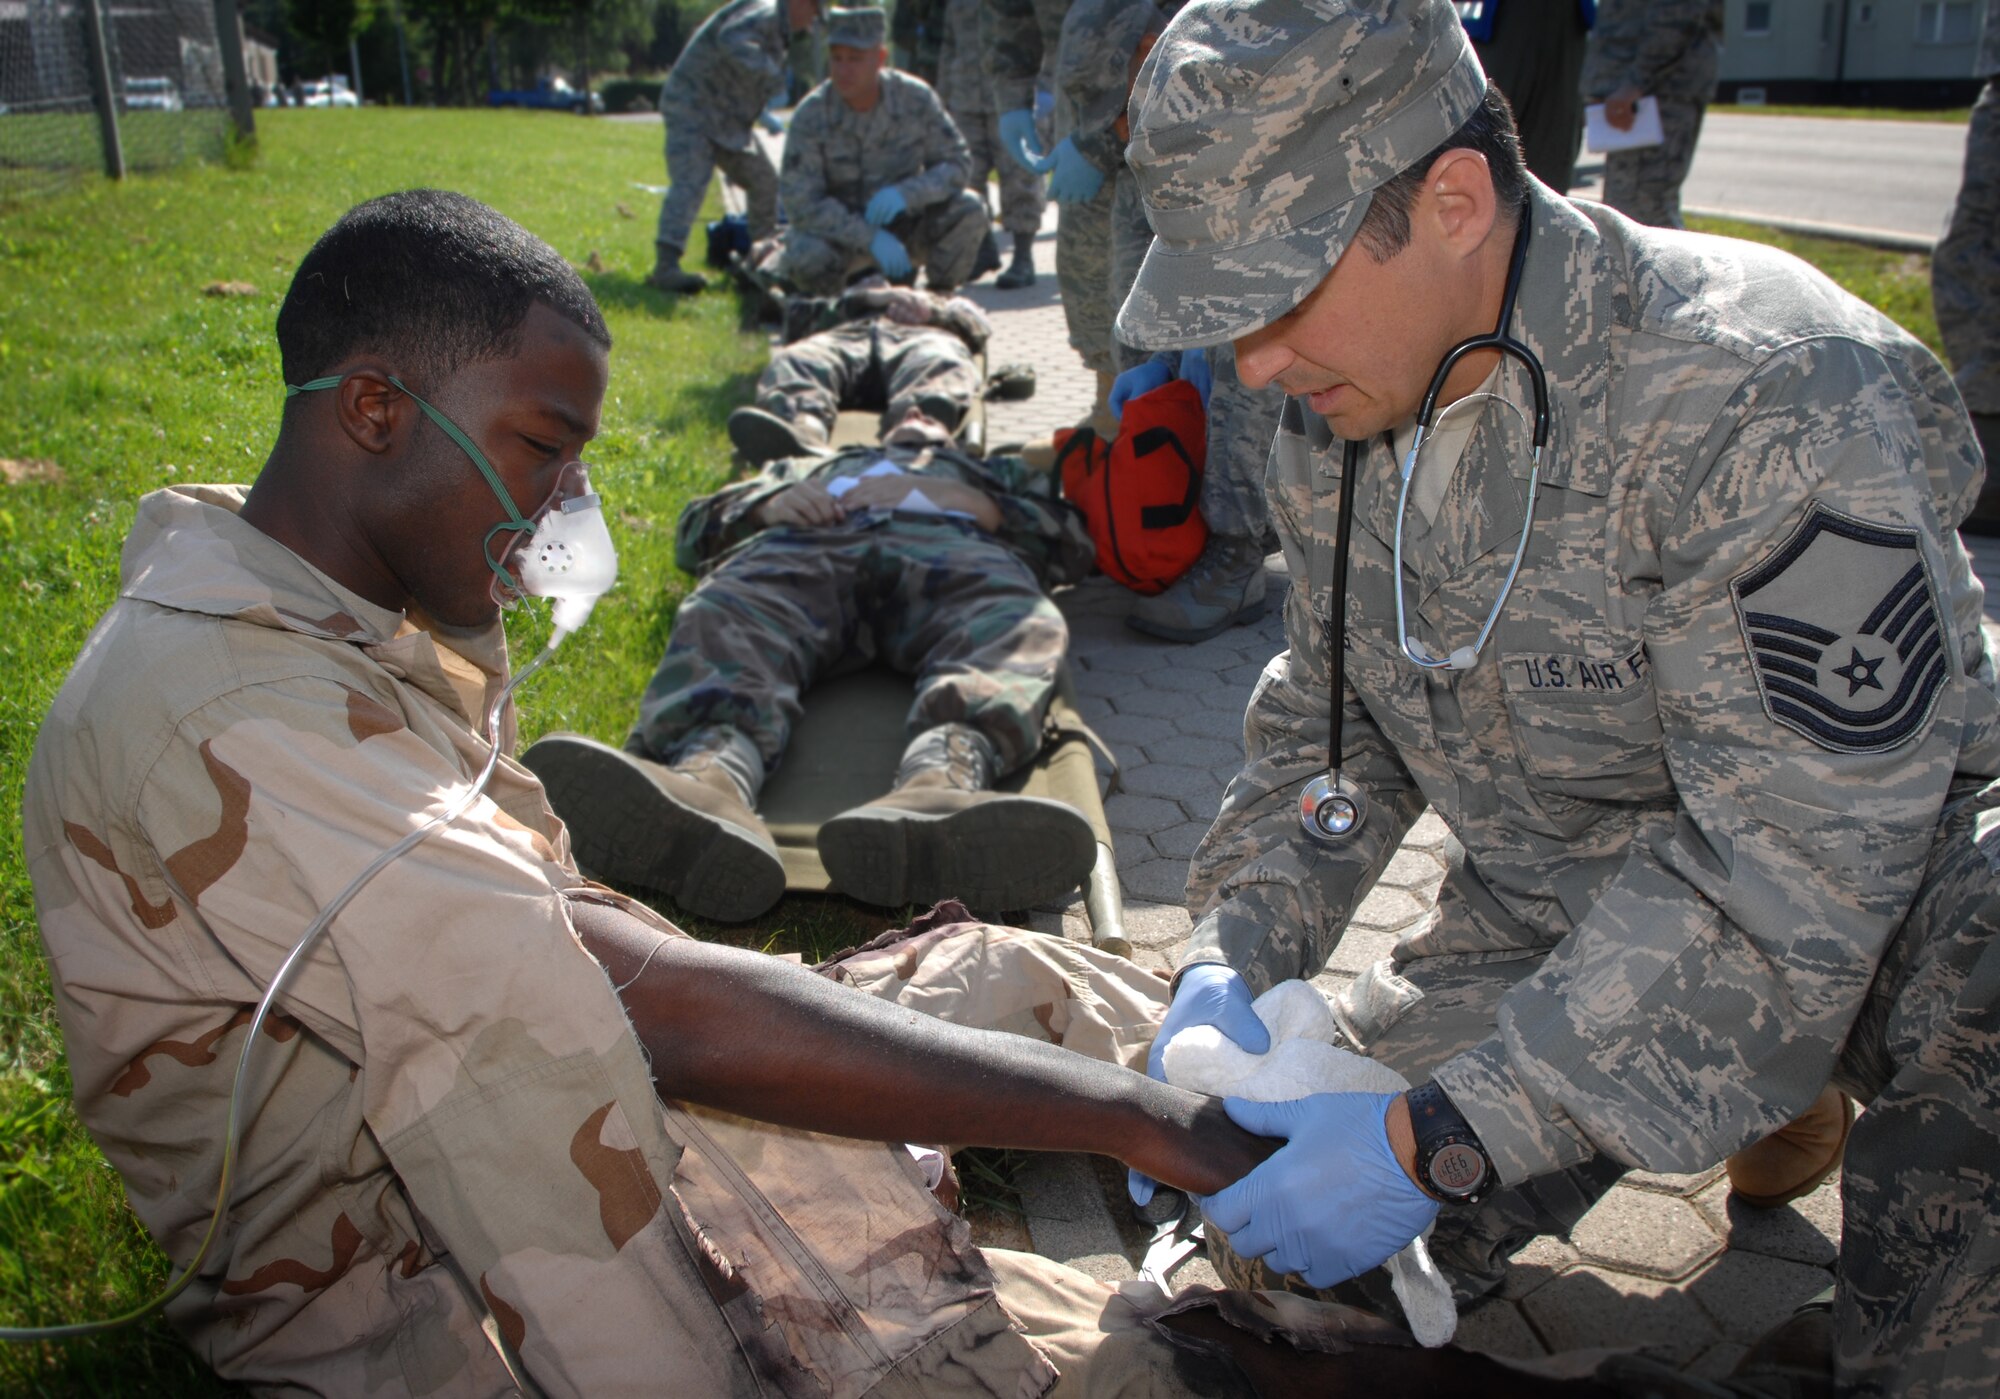 SPANGDAHLEM AIR BASE, Germany – Master Sgt. Troy Long, 134th Medical Group, McGhee-Tyson Air National Guard, Tenn., medical technician, treats Airman Eric Haygood, 52nd Equipment Maintenance Squadron Emergency Evaluations Team volunteer, for simulated injuries. The players, volunteers and the medical response team in the background, are all part of an emergency management exercise with a simulated F-16 crash involving by-standers June 23. (U.S. Air Force photo by Master Sgt. Bill Gomez) 